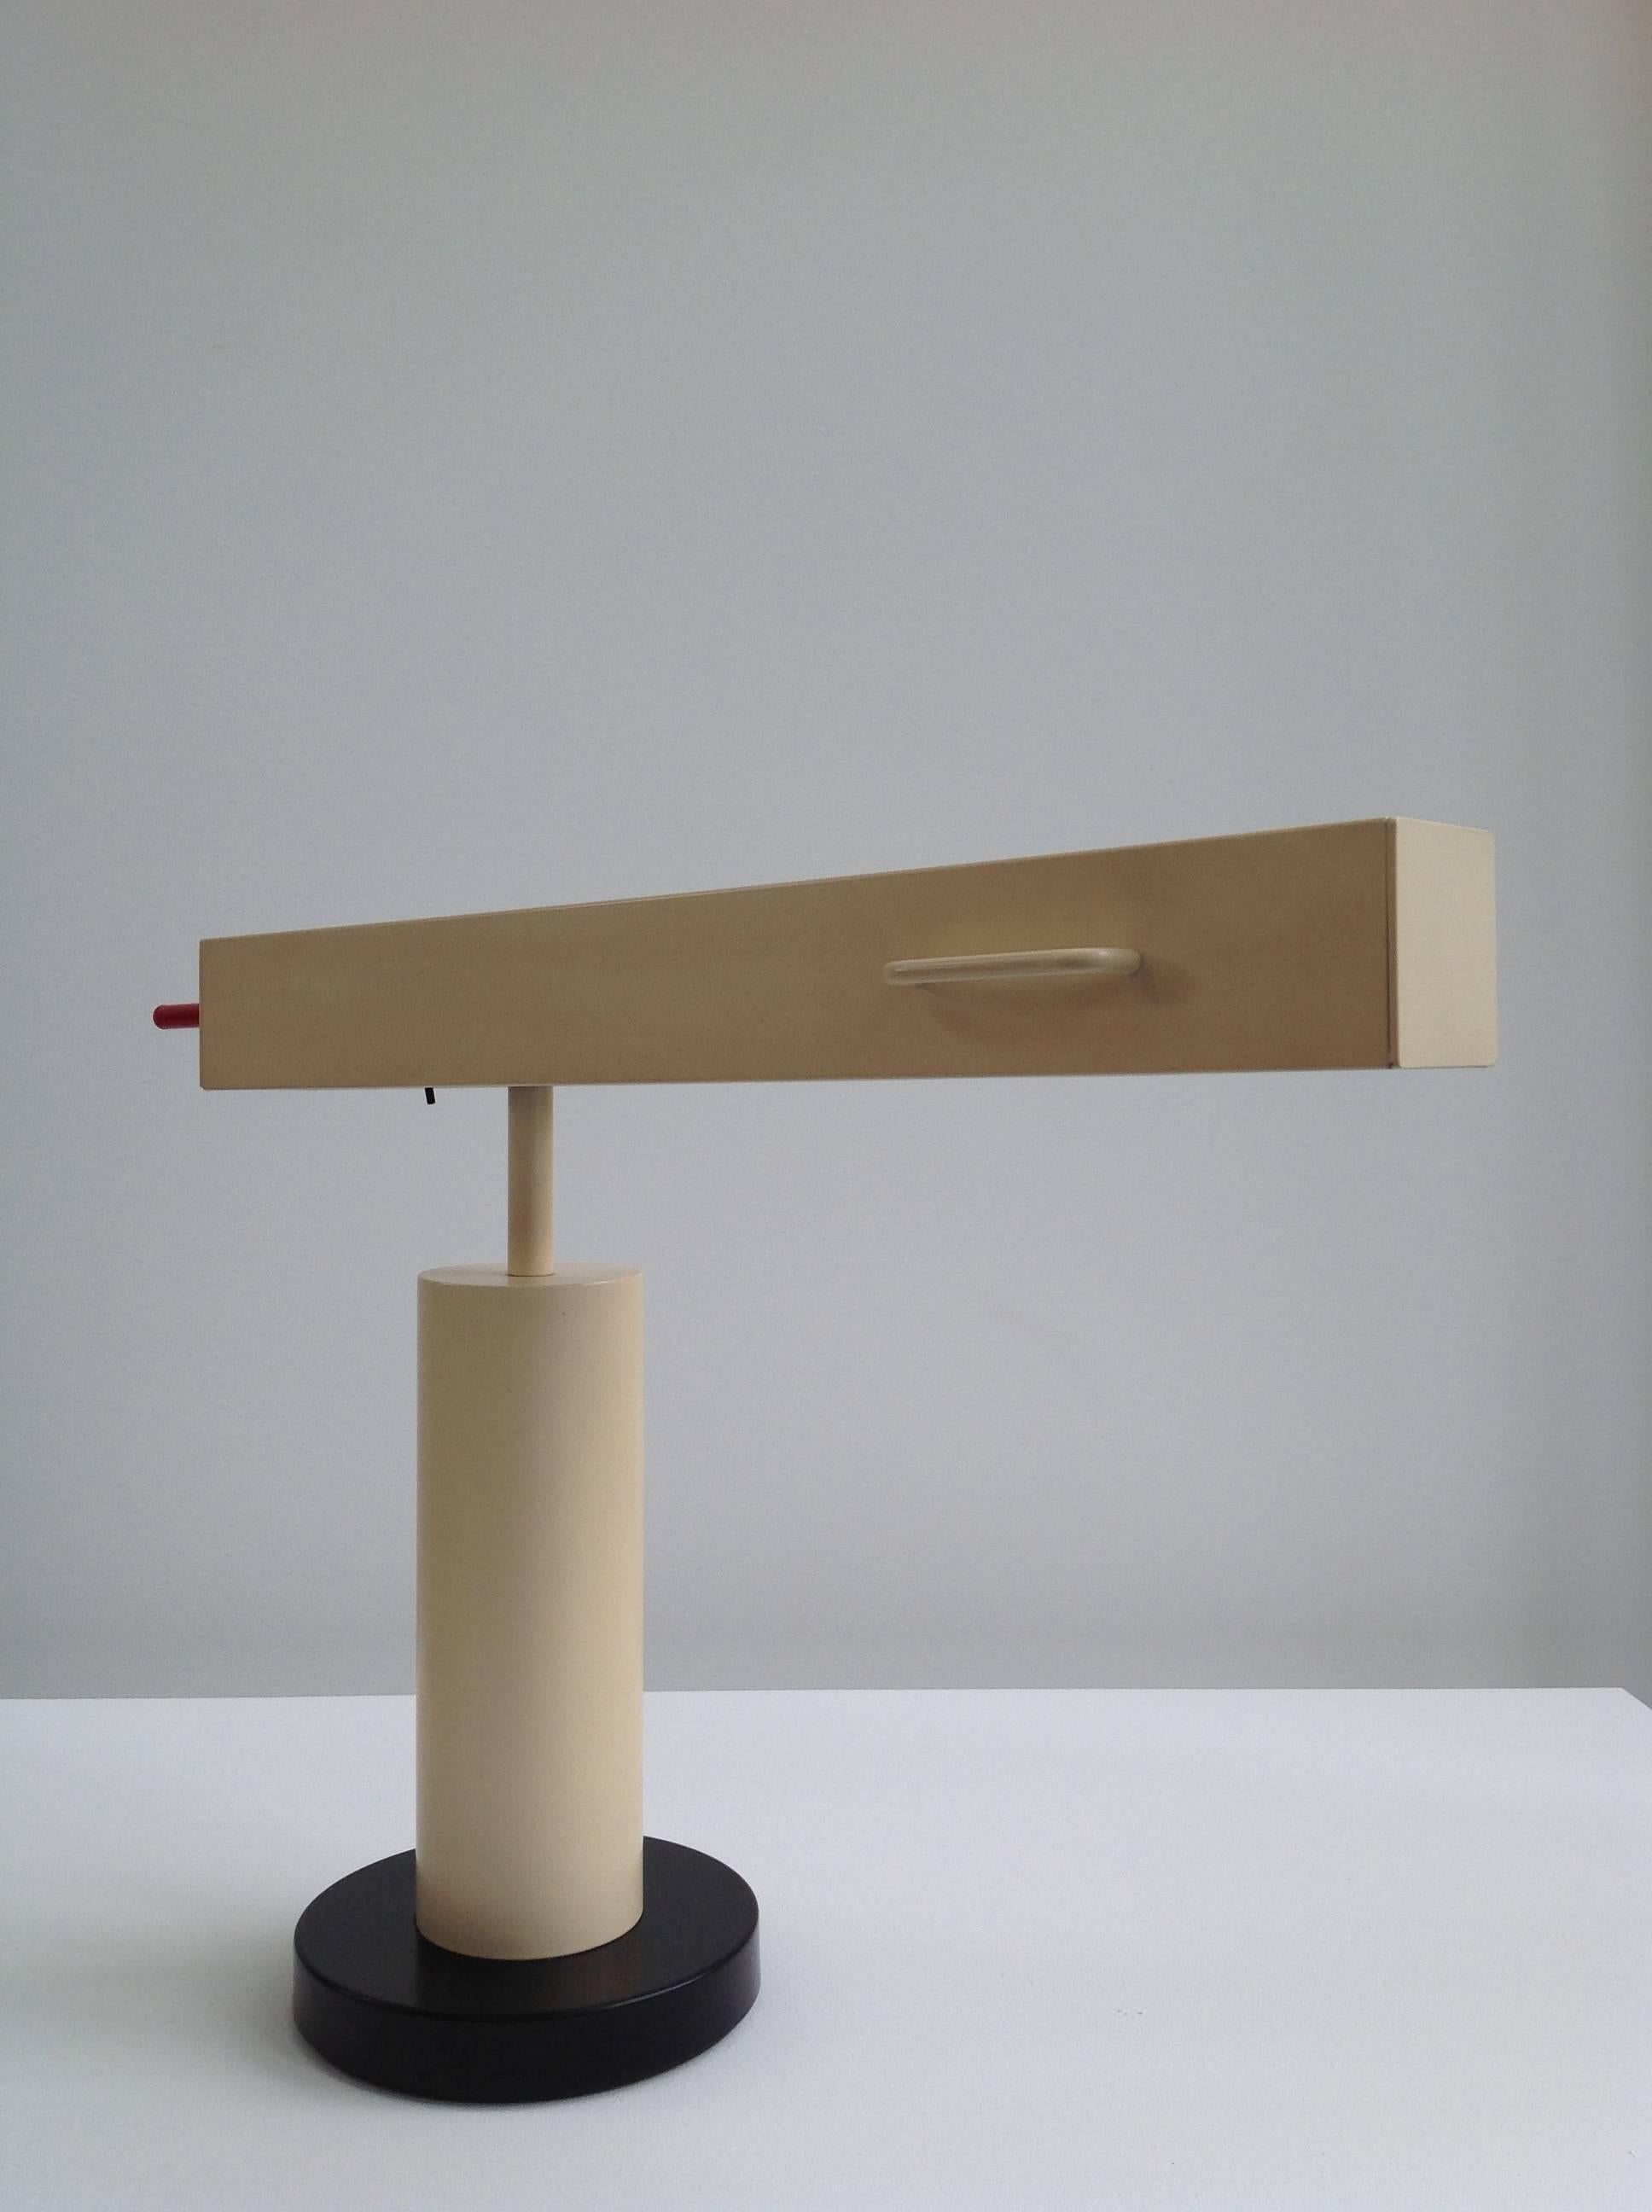 Metal Extremely Rare Desk Lamp Design by Ettore Sottsass, Made in Small Quantity For Sale